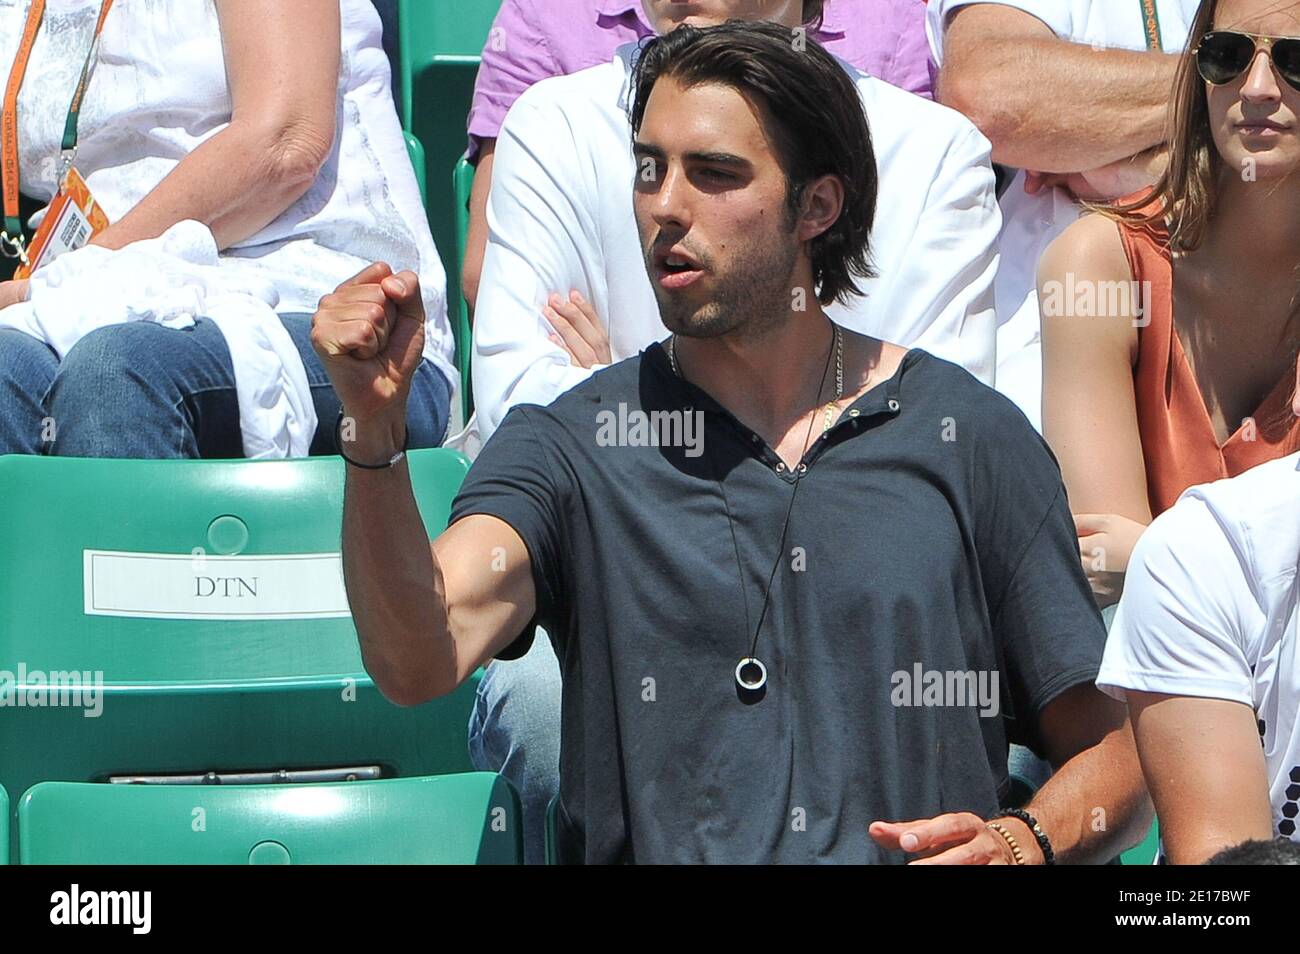 Serbia's basket player's Sasha Vujacic boyfriend of Maria Sharapova attending the French Tennis Open 2011 at Roland Garros arena in Paris, France on June 2 2011. Photo by Christophe Guibbaud/ABACAPRESS.COM Stock Photo